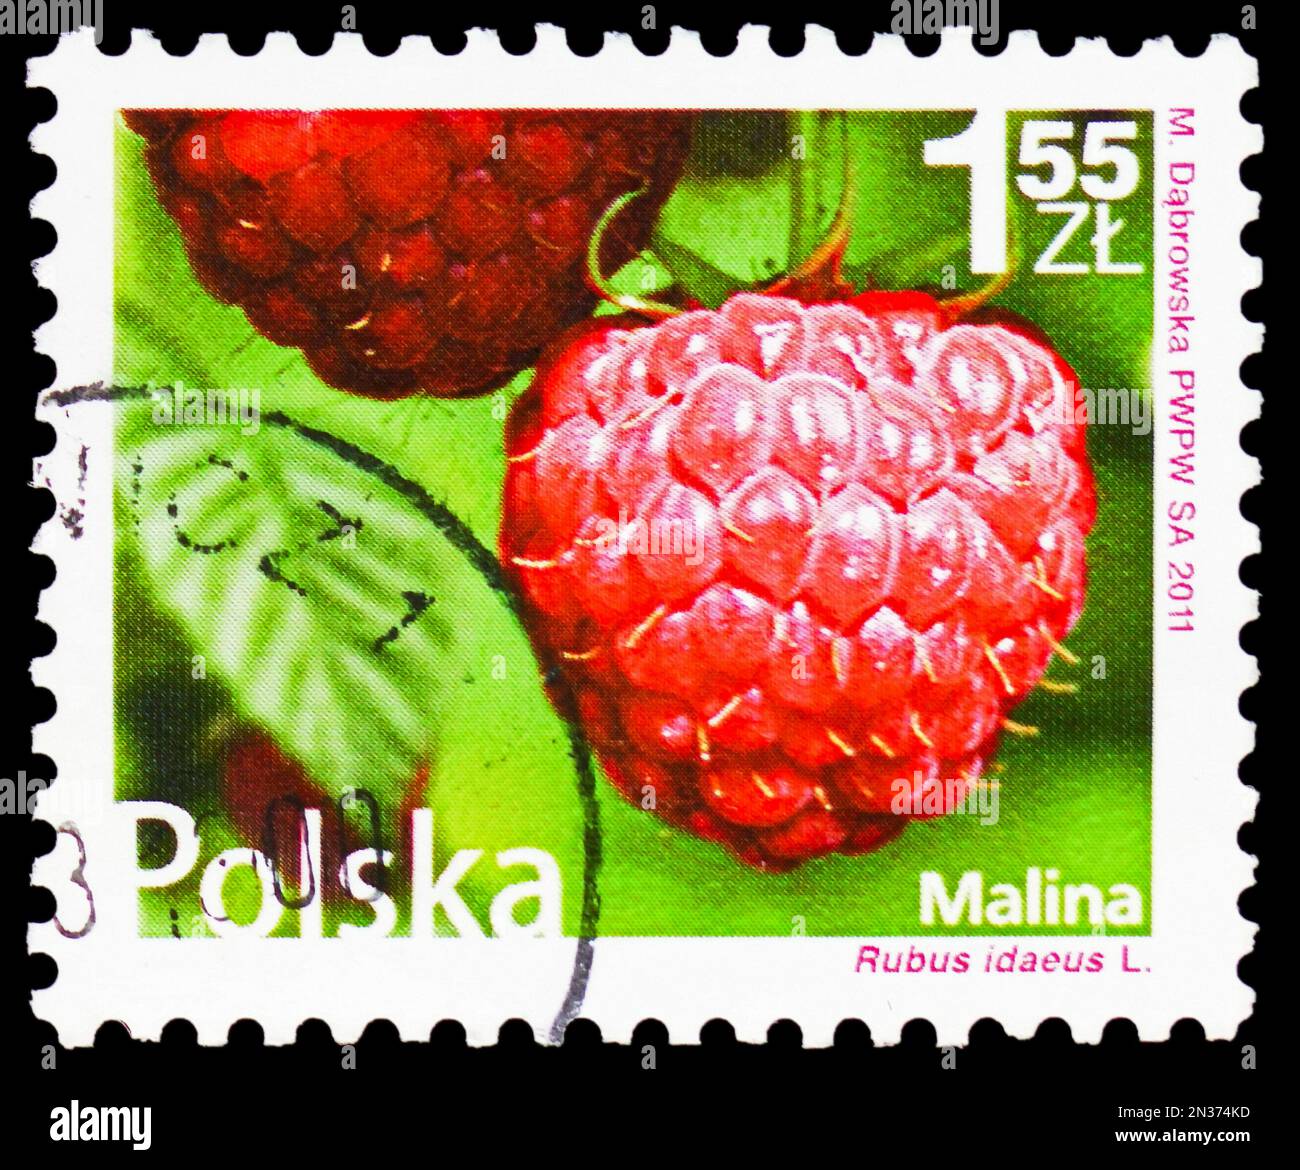 MOSCOW, RUSSIA - FEBRUARY 4, 2023: Postage stamp printed in Poland shows Raspberry (Rubus idaeus), Flowers and Fruits 2011 serie, circa 2011 Stock Photo